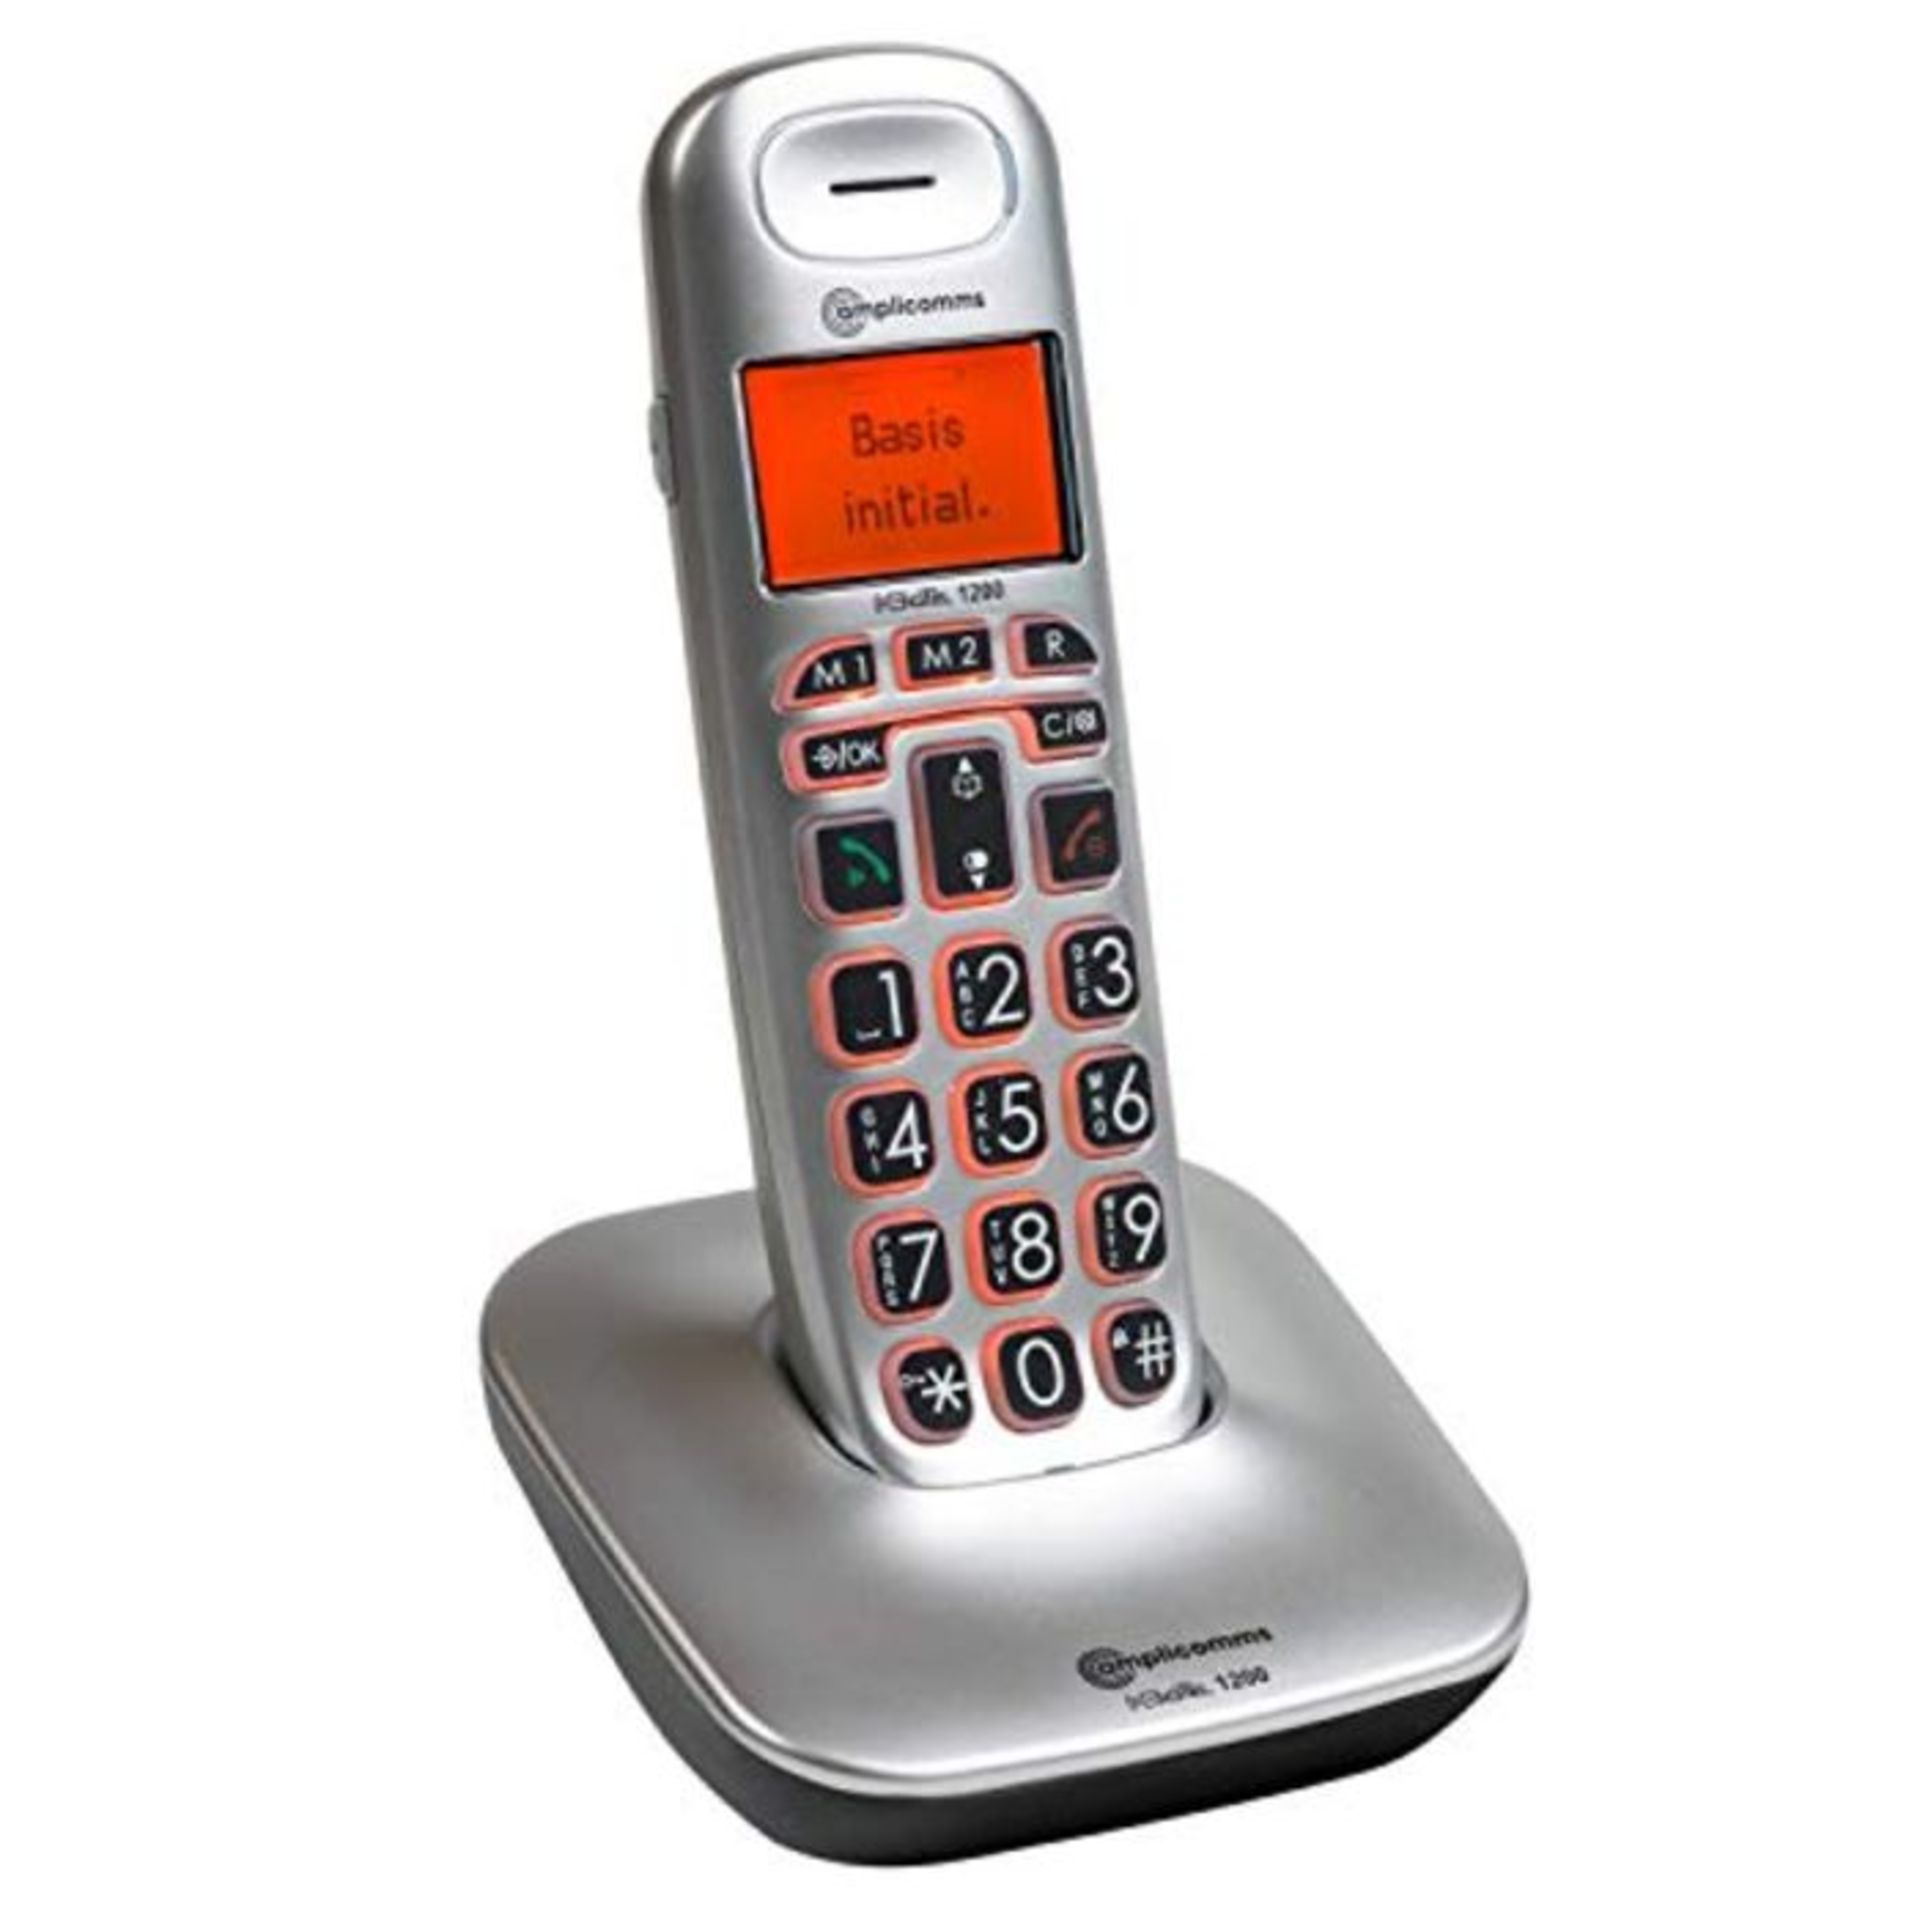 Amplicomms BigTel 1200 - Big Button Phone for Elderly - Loud Phones for Hard of Hearin